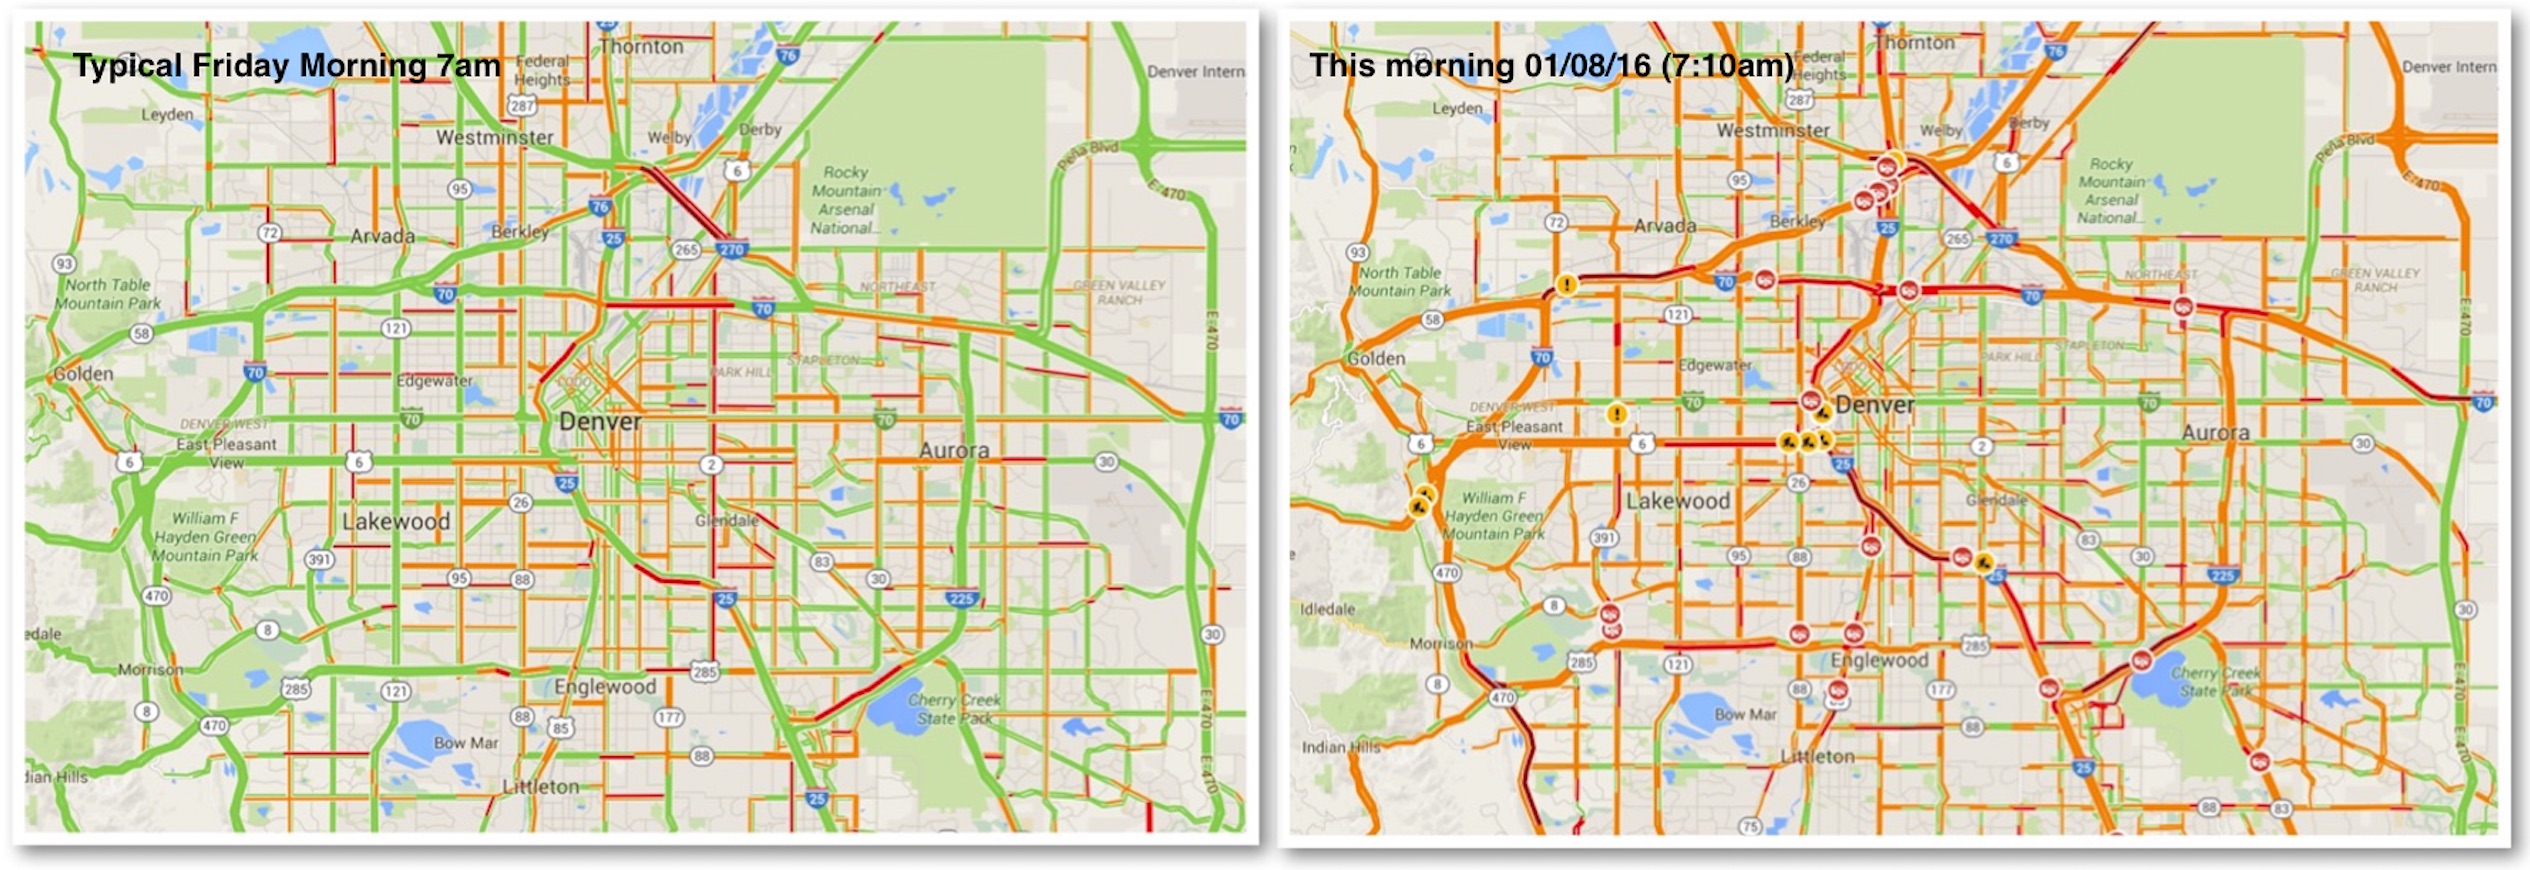 Typical Friday morning traffic delays compared with today's morning commute | Google